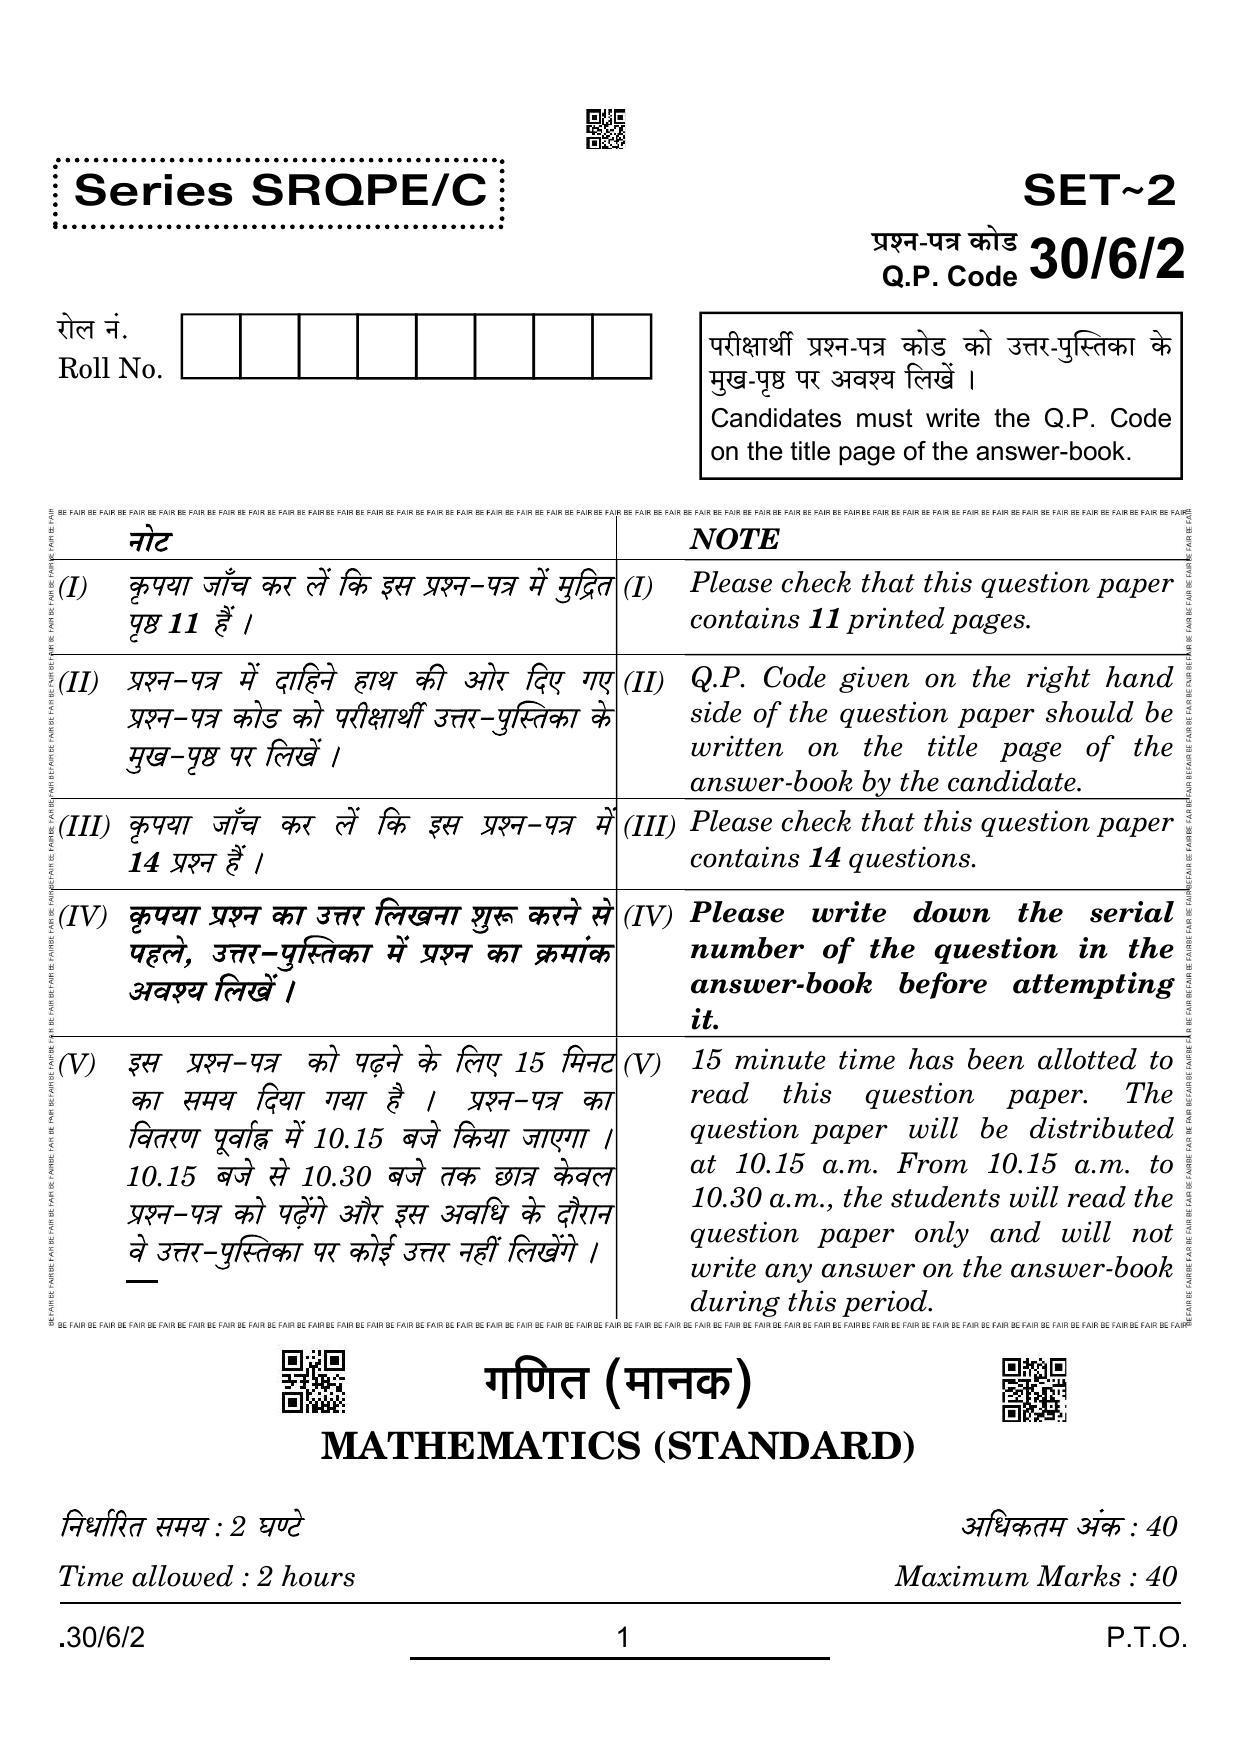 CBSE Class 10 30-6-2 Maths Std. 2022 Compartment Question Paper - Page 1